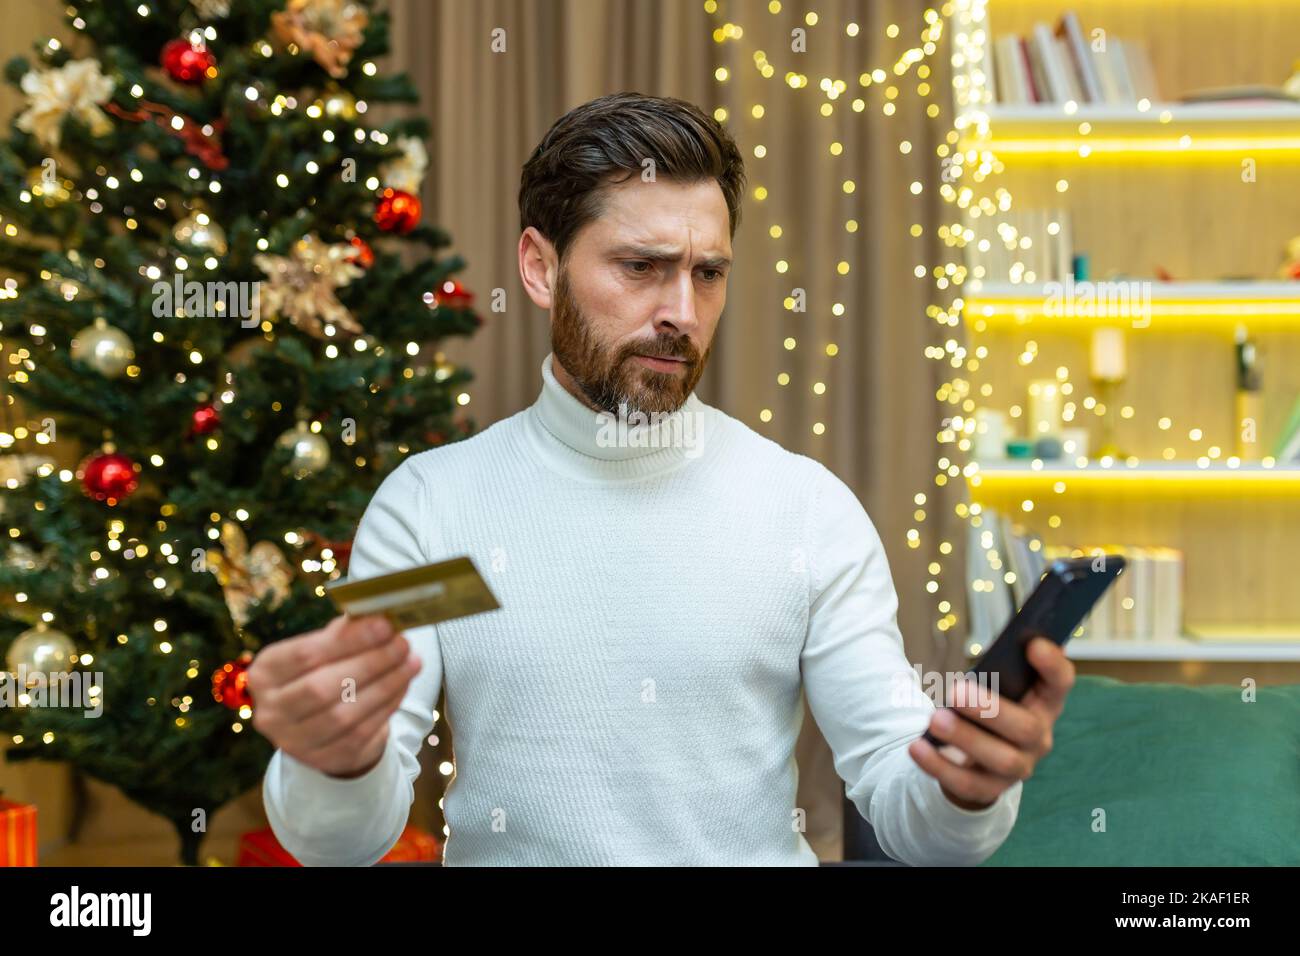 Confused and embarrassed man looks at the phone, holds a credit card in his hands. Sitting on the sofa near the Christmas tree, unable to make festive online purchases, he doesn't have enough money. Stock Photo